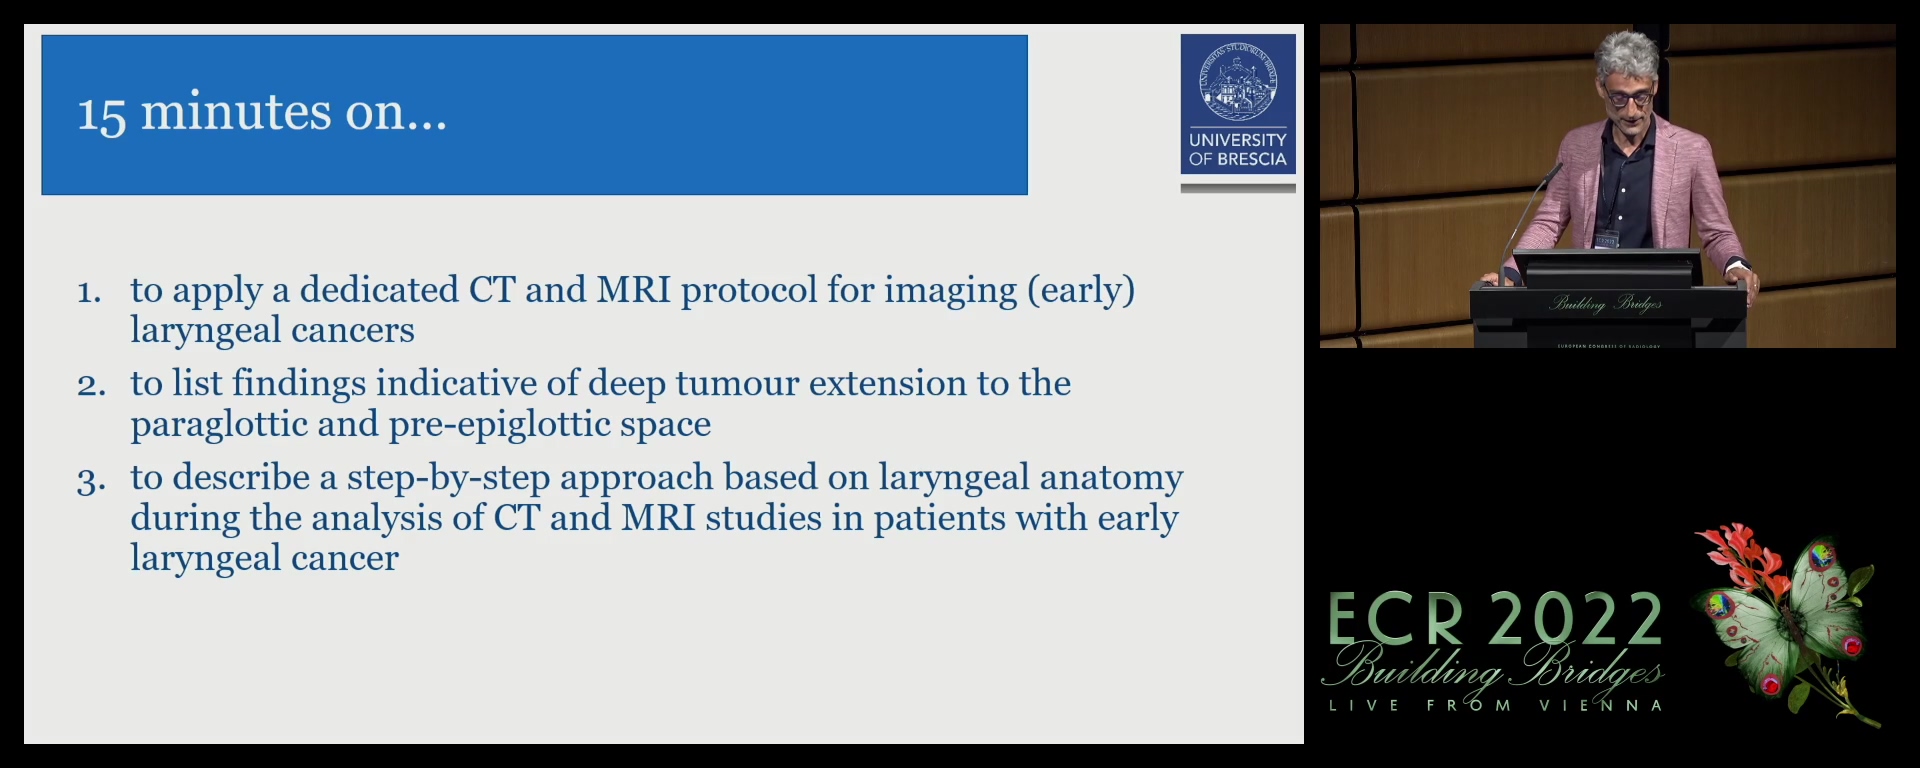 Imaging checklist for treatment planning in early laryngeal cancers